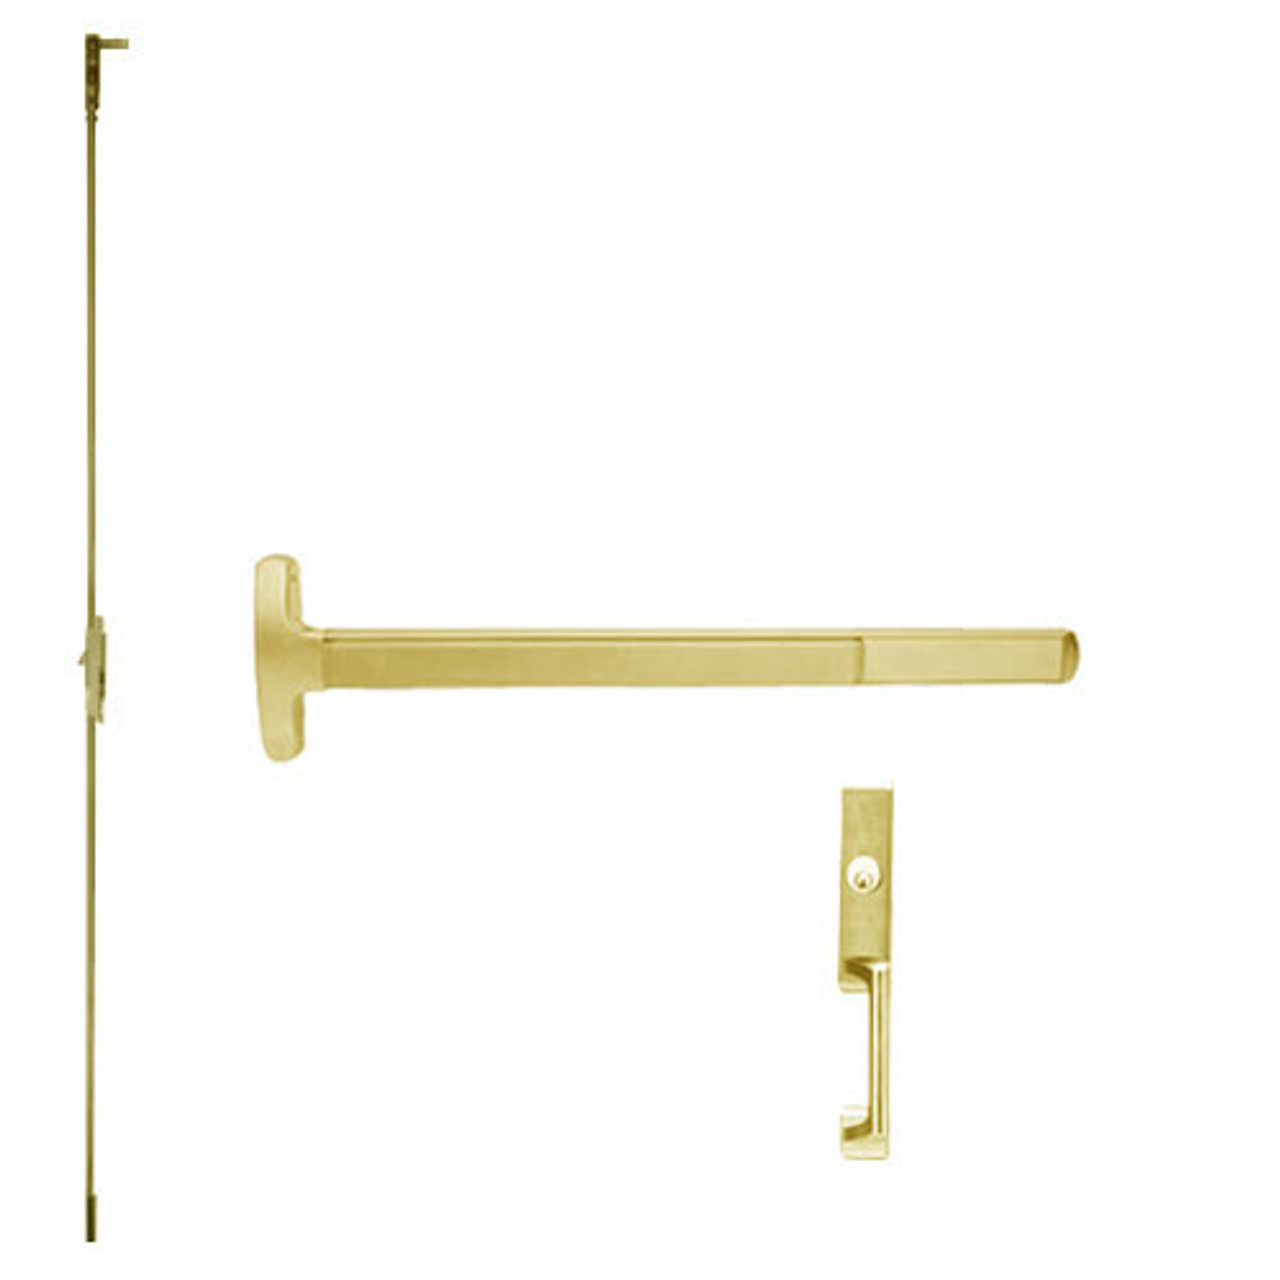 F-24-C-NL-US3-4-RHR Falcon Exit Device in Polished Brass